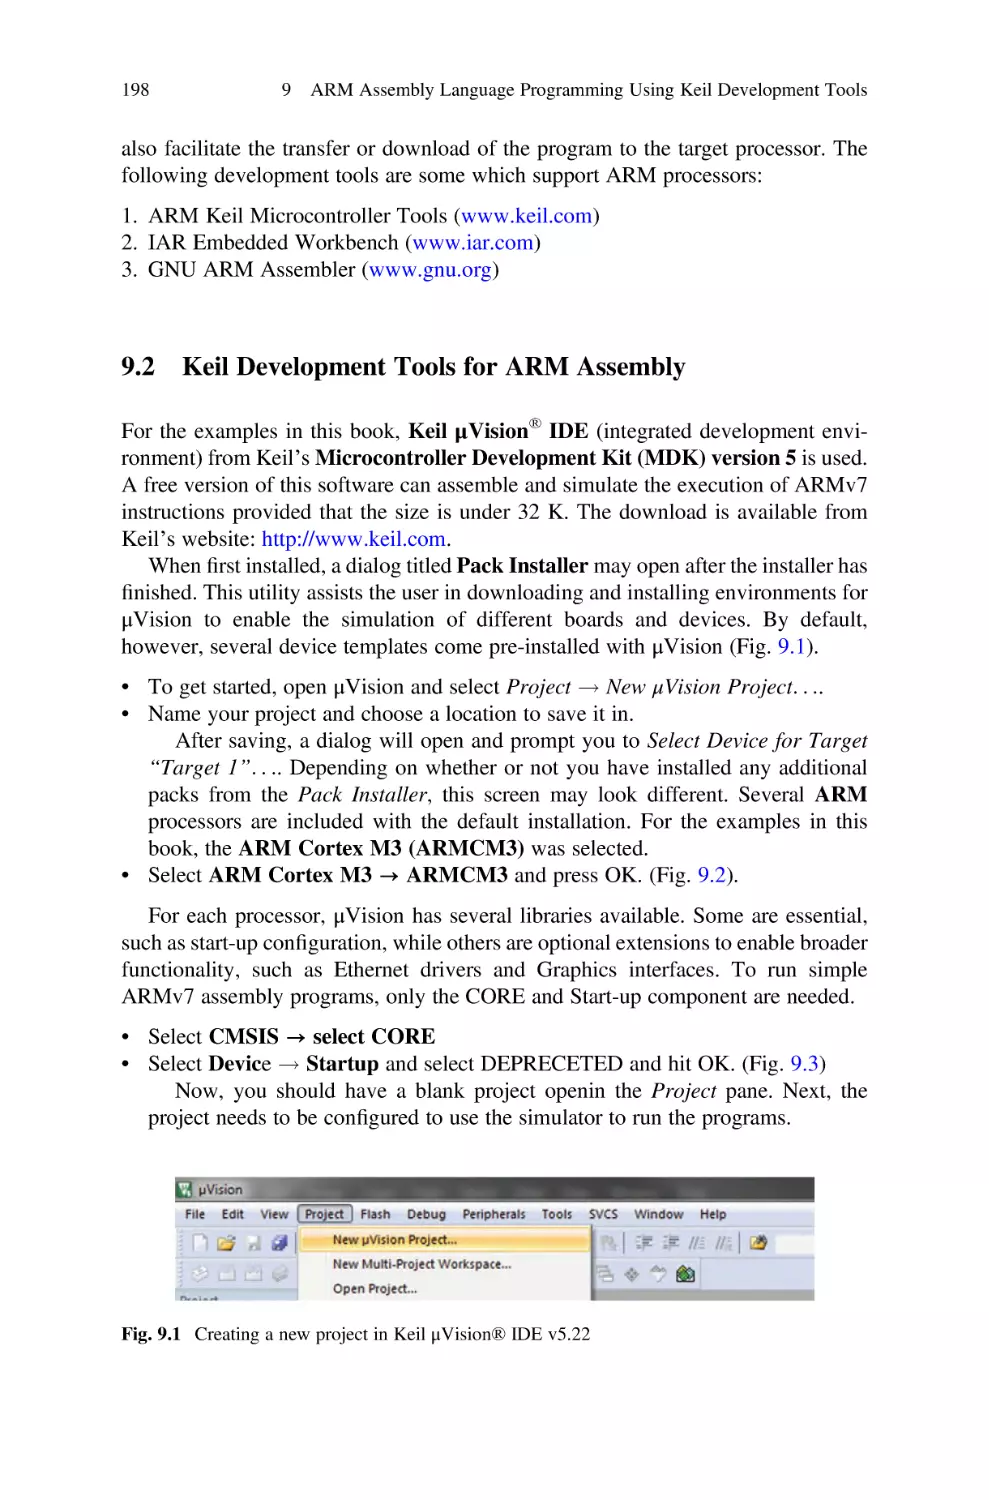 9.2 Keil Development Tools for ARM Assembly